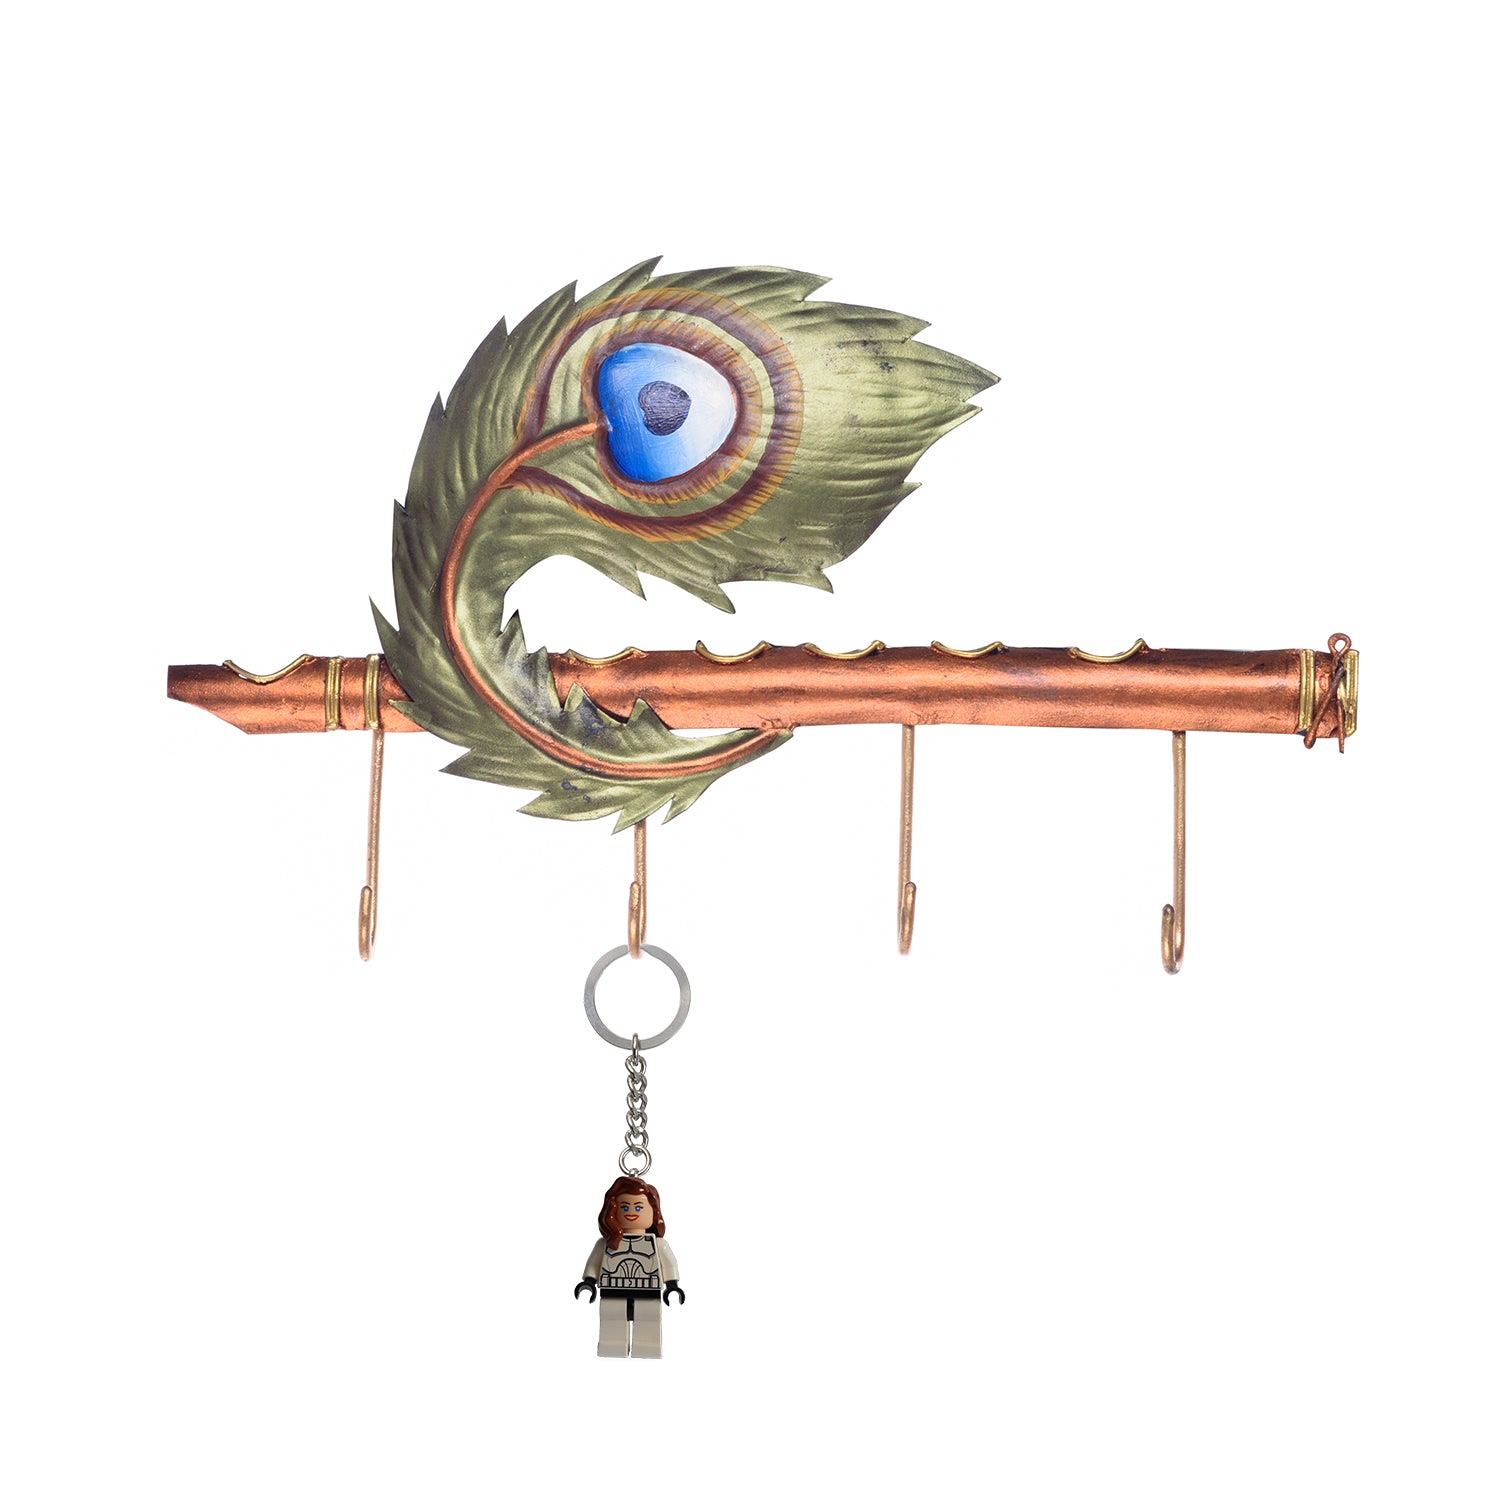 Wrought Iron basuri with mor pankh
Key Holder (Green and Brown) 1